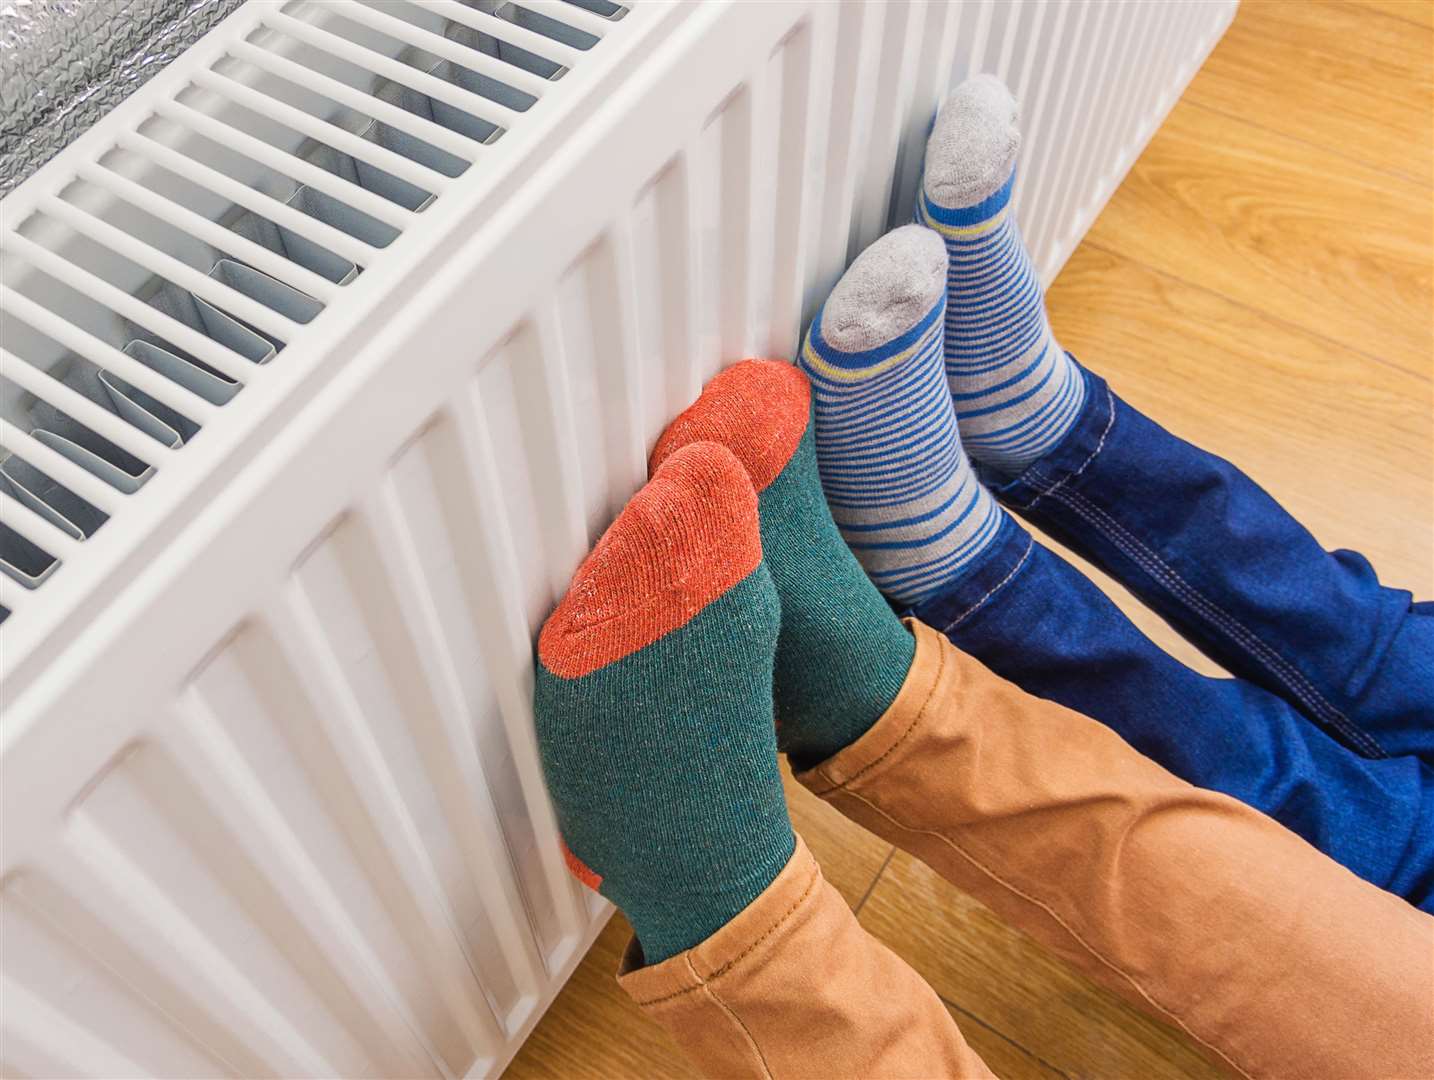 Cold weather payments can help families keep homes warm. Image: iStock.